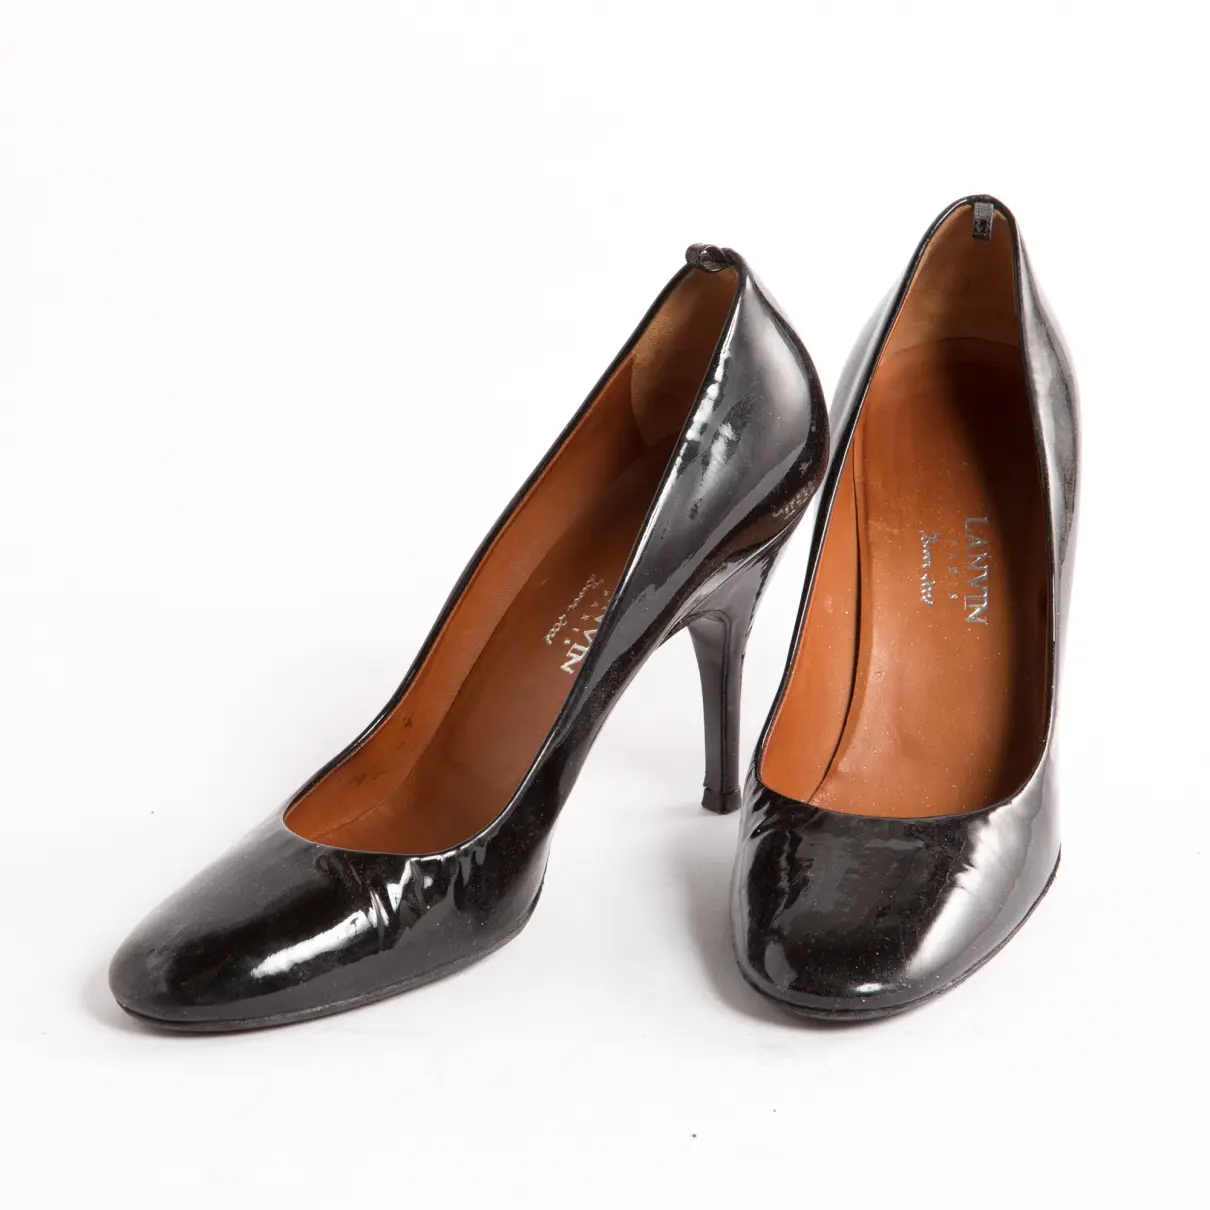 Lanvin Patent leather heels for sale